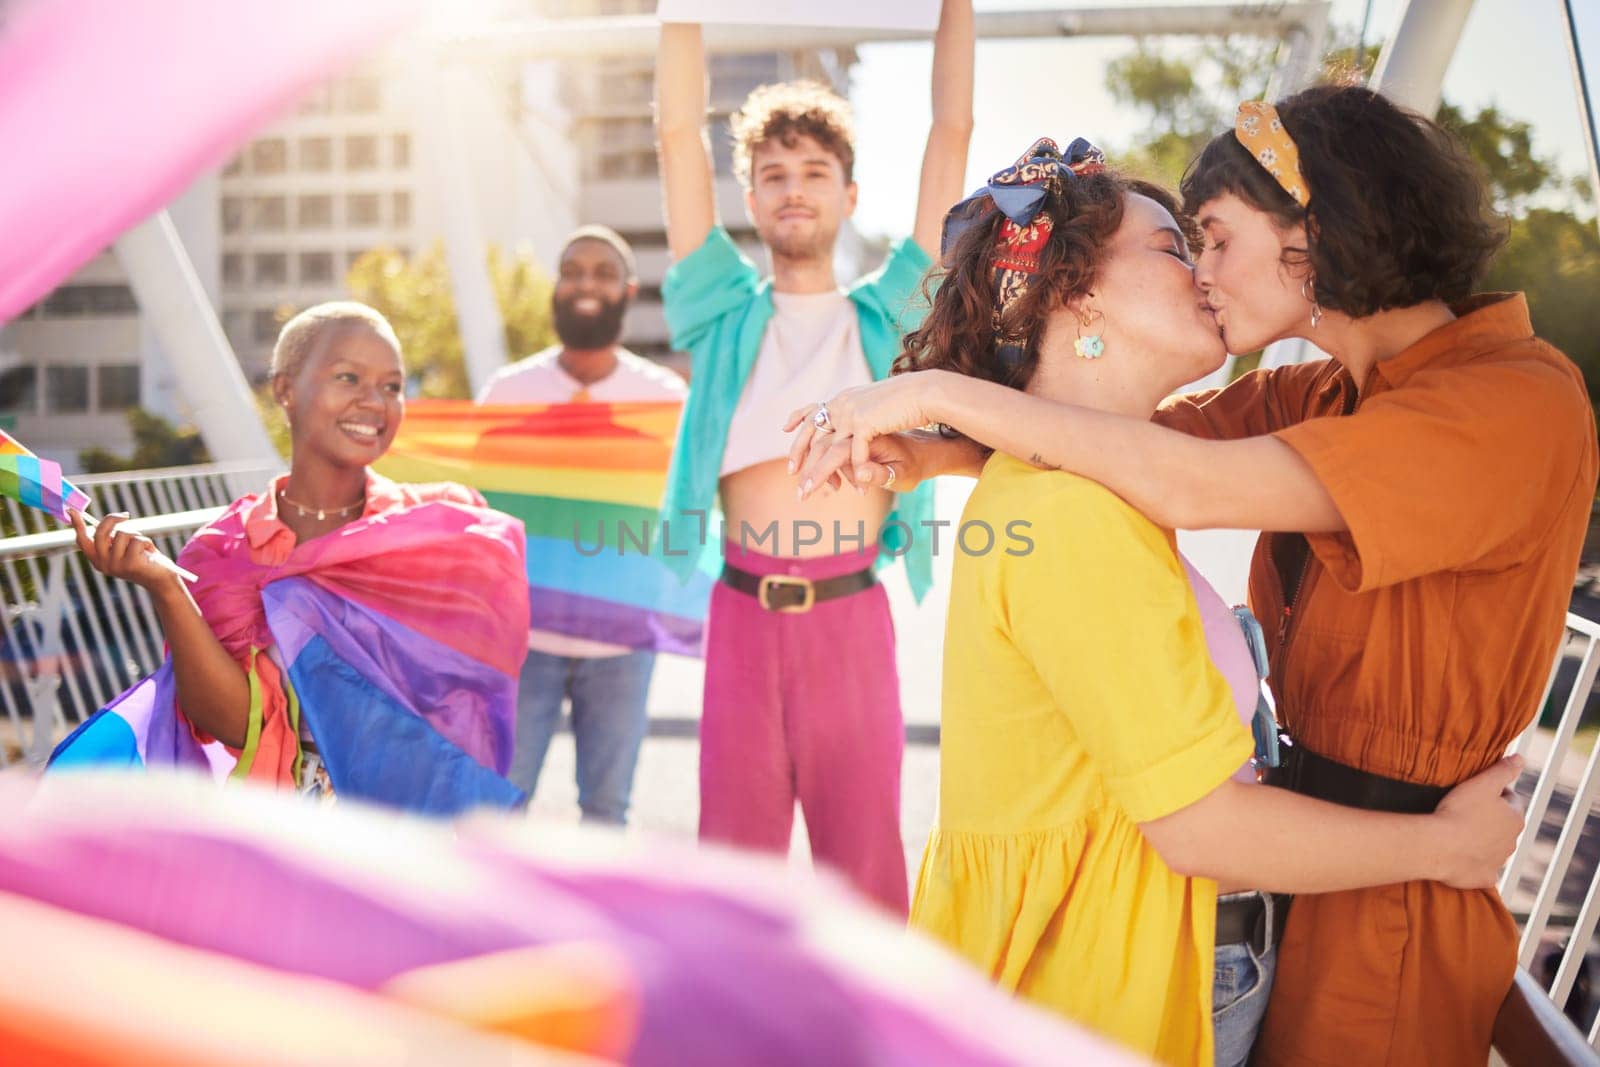 Lgbt, kiss and couple of friends in city with rainbow flag for support, queer celebration and relationship. Diversity, lgbtq community and group of people enjoy freedom, happiness and pride identity.